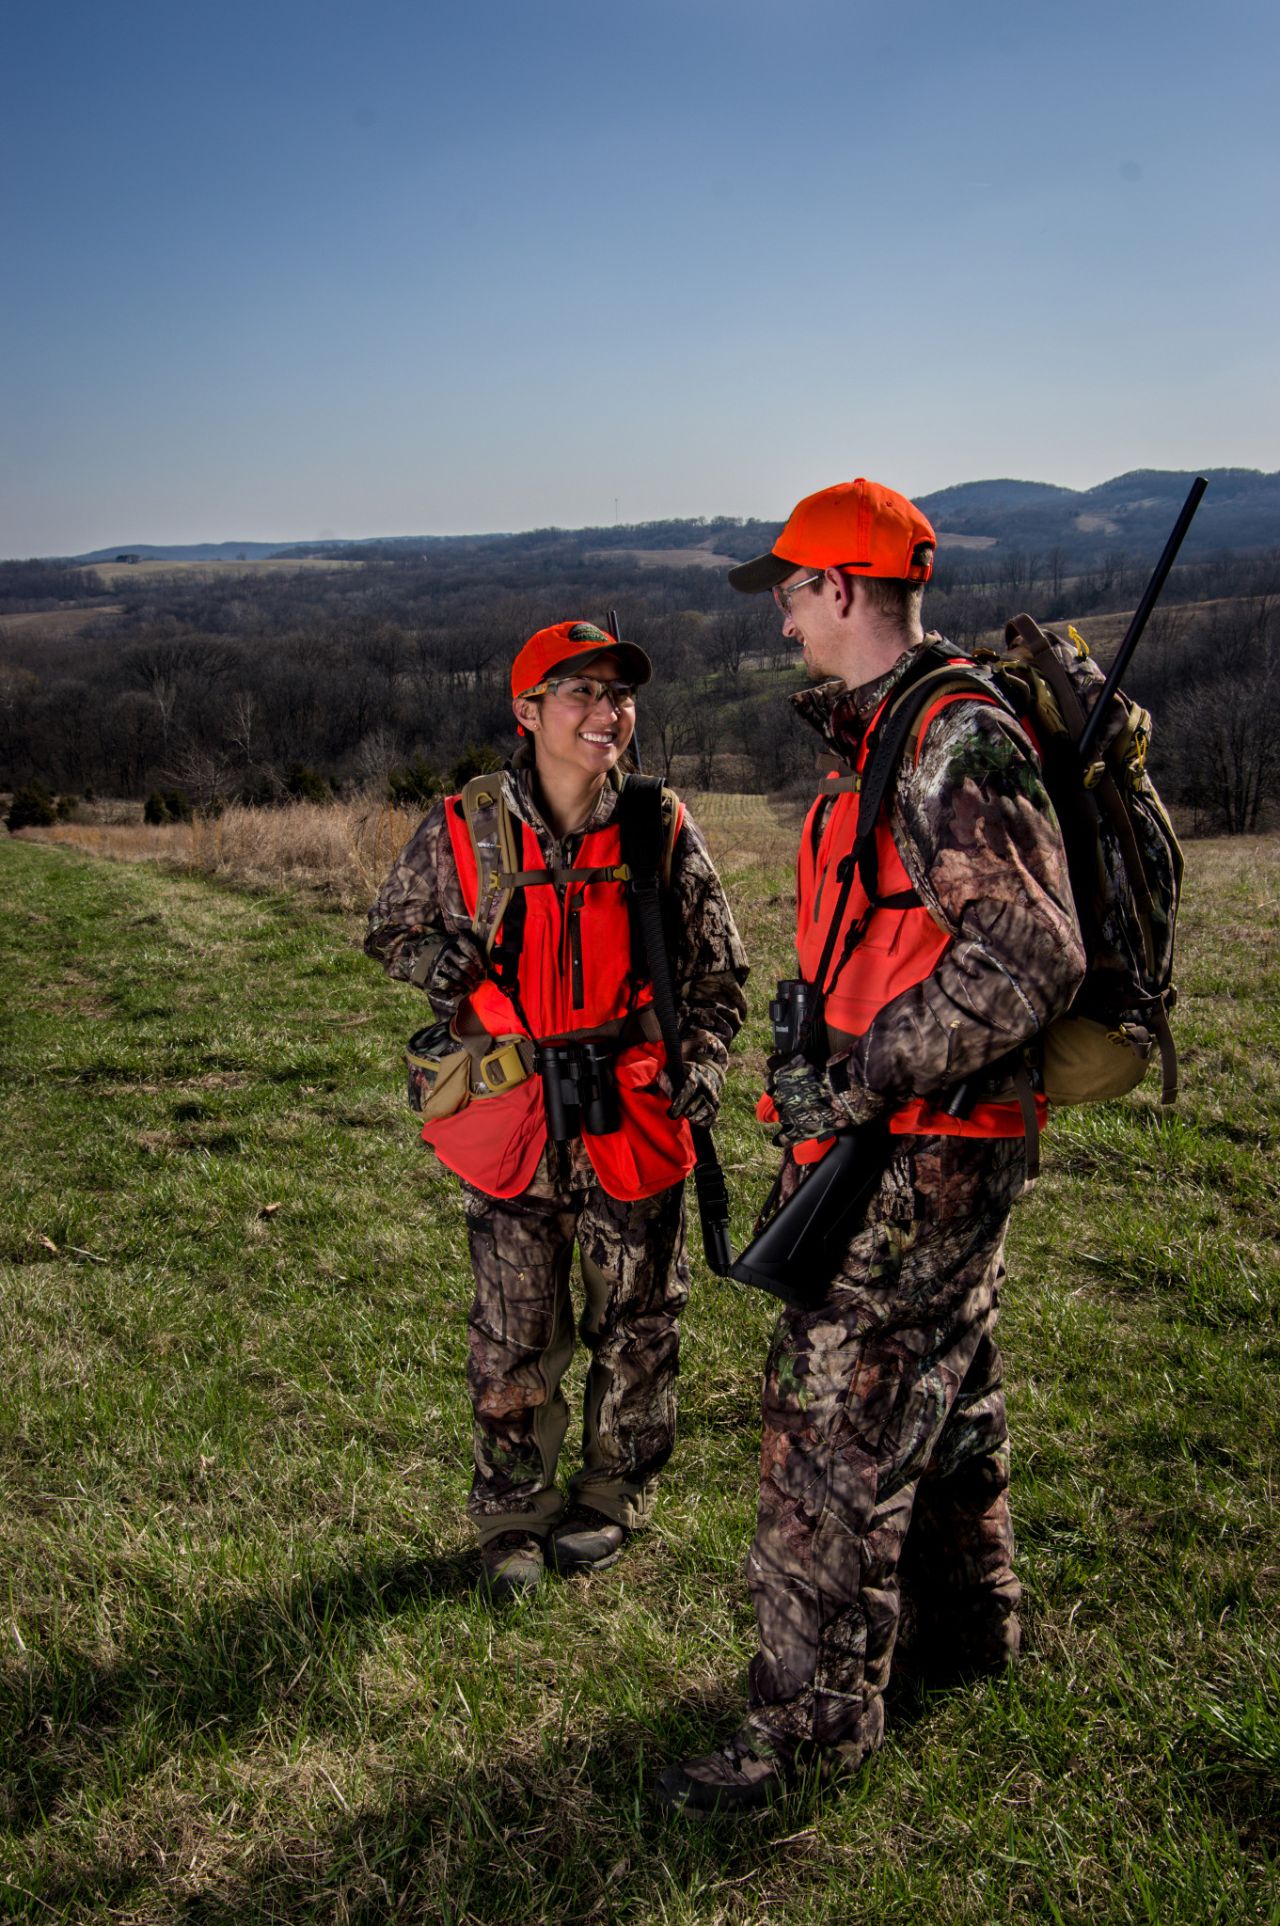 NEW Sunday Hunting LAW – Pennsylvania Celebrates More Hunting for Everyone